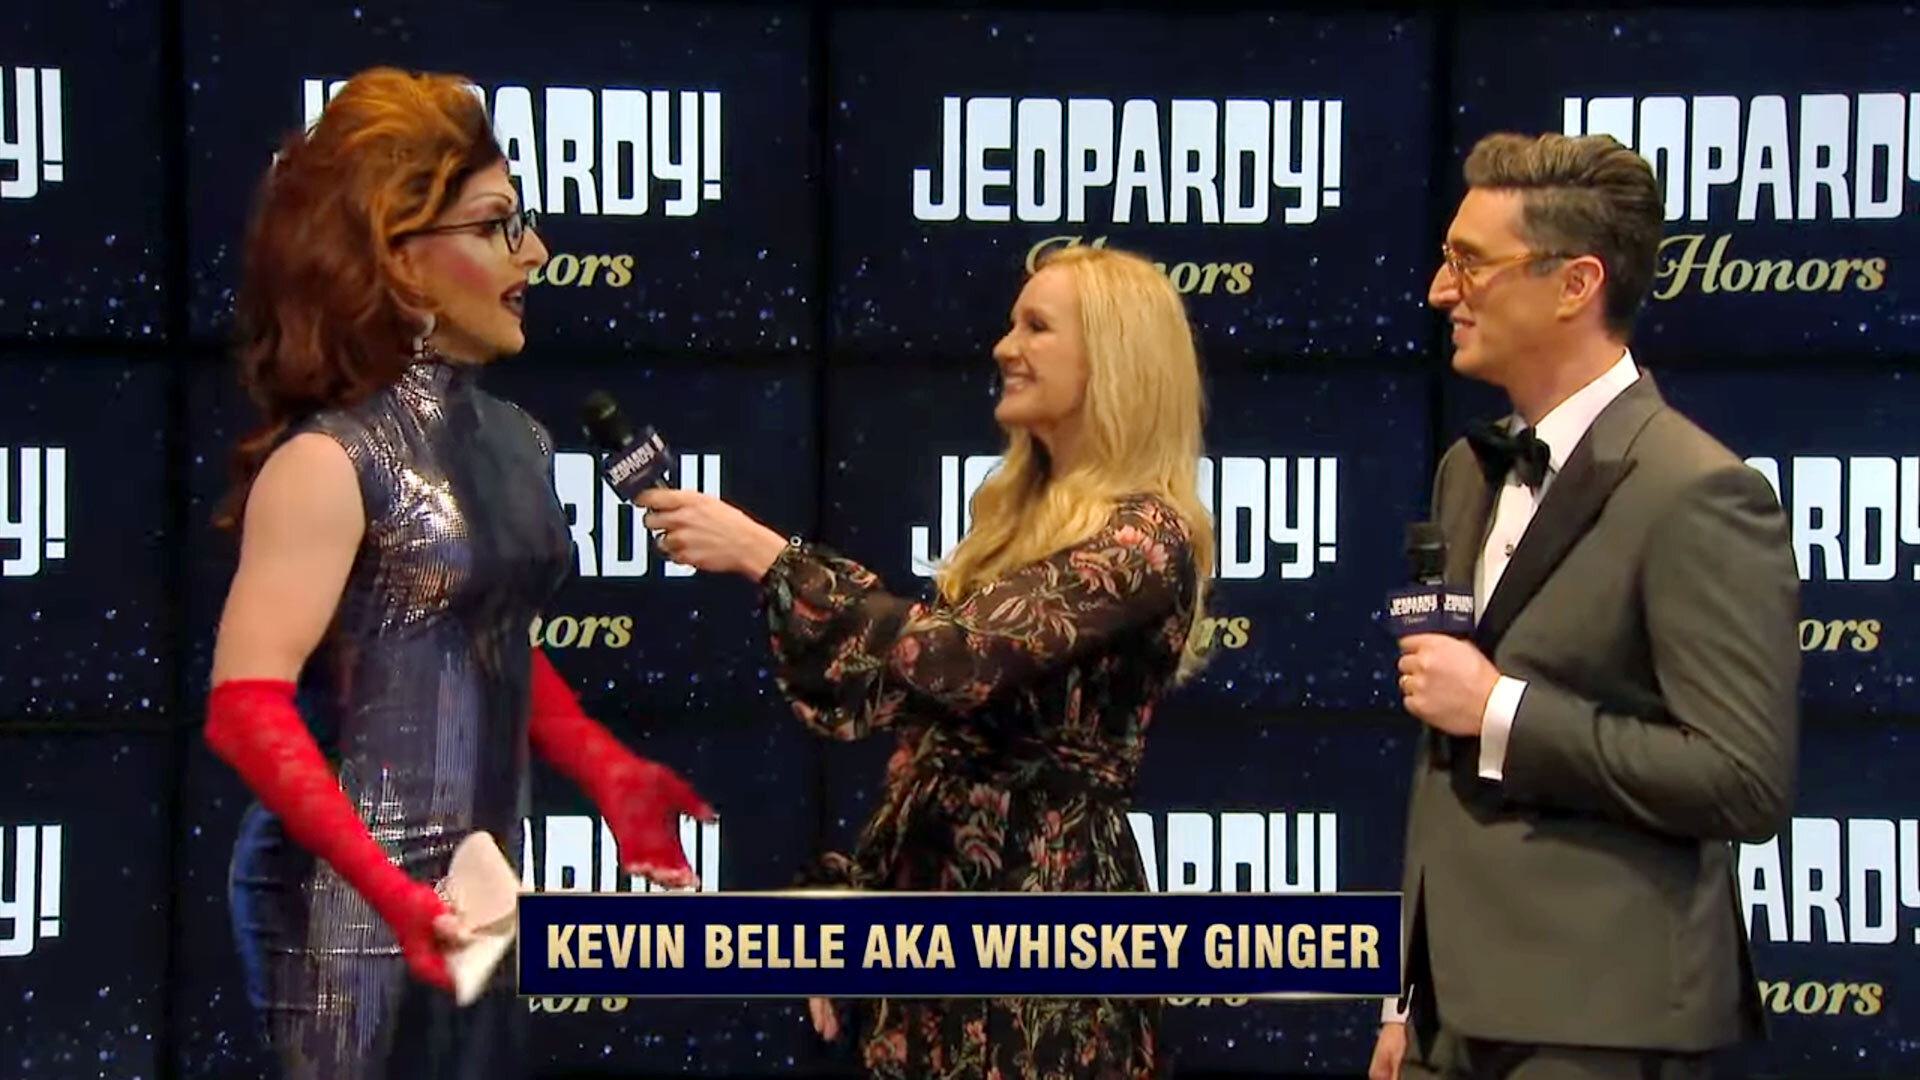 Kevin Belle aka Whiskey Ginger with Sarah and Buzzy at Jeopardy! Honors